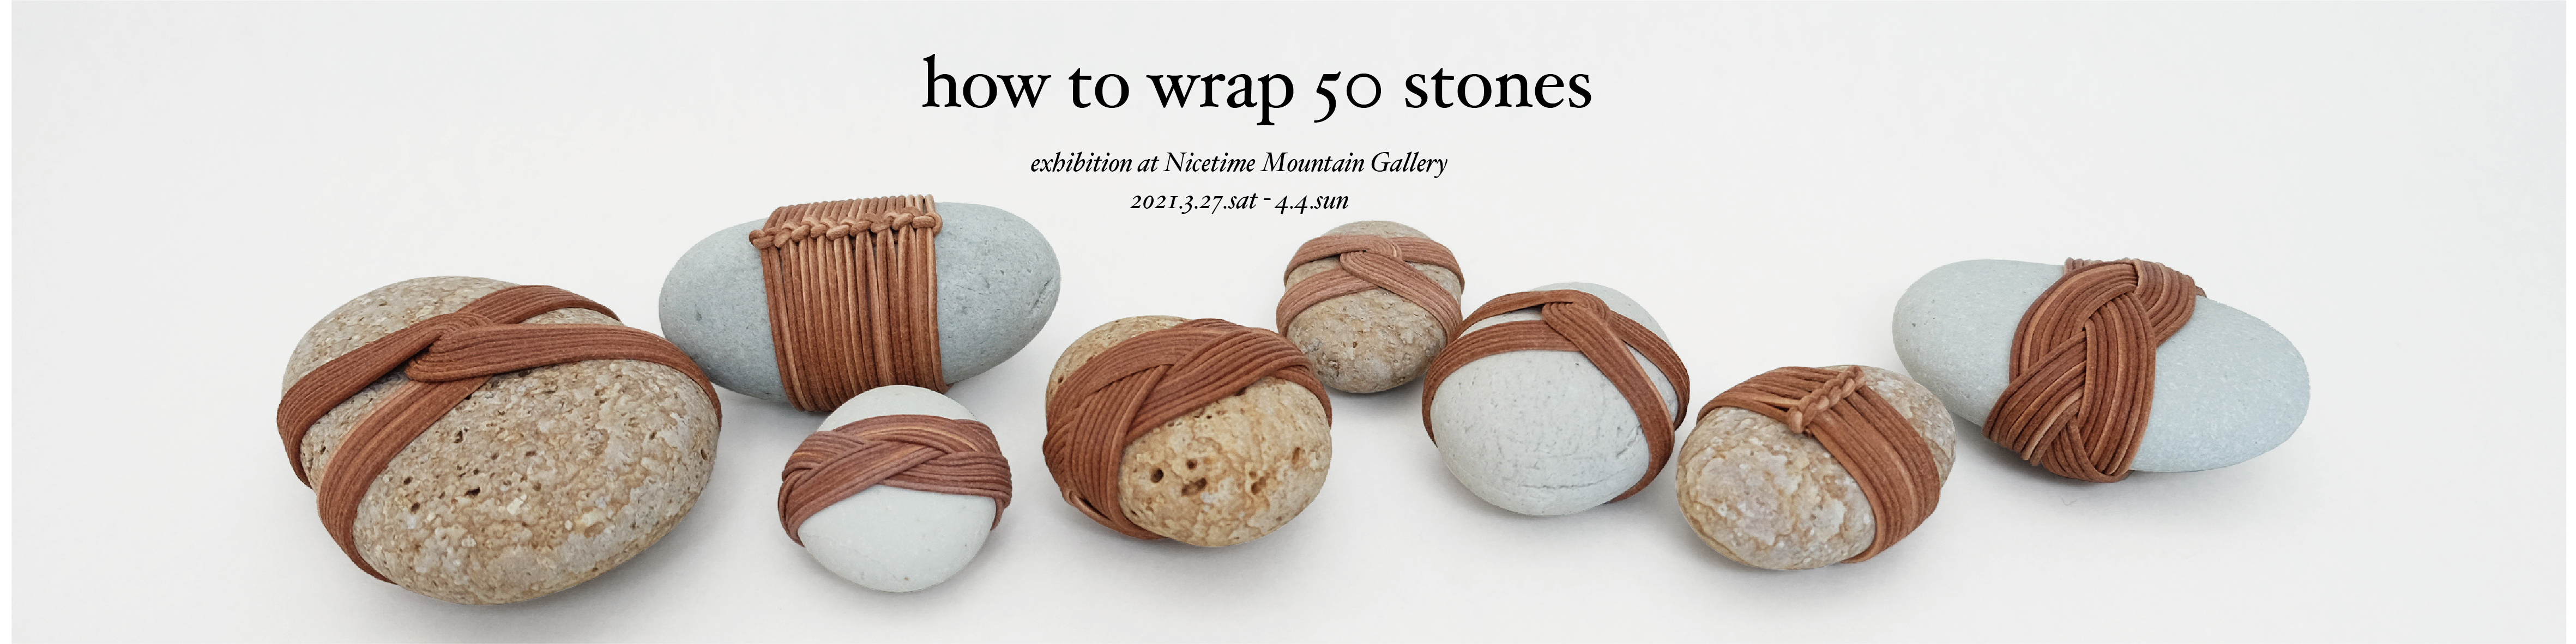 how to wrap 50 stones』 - Nicetime Mountain Gallery